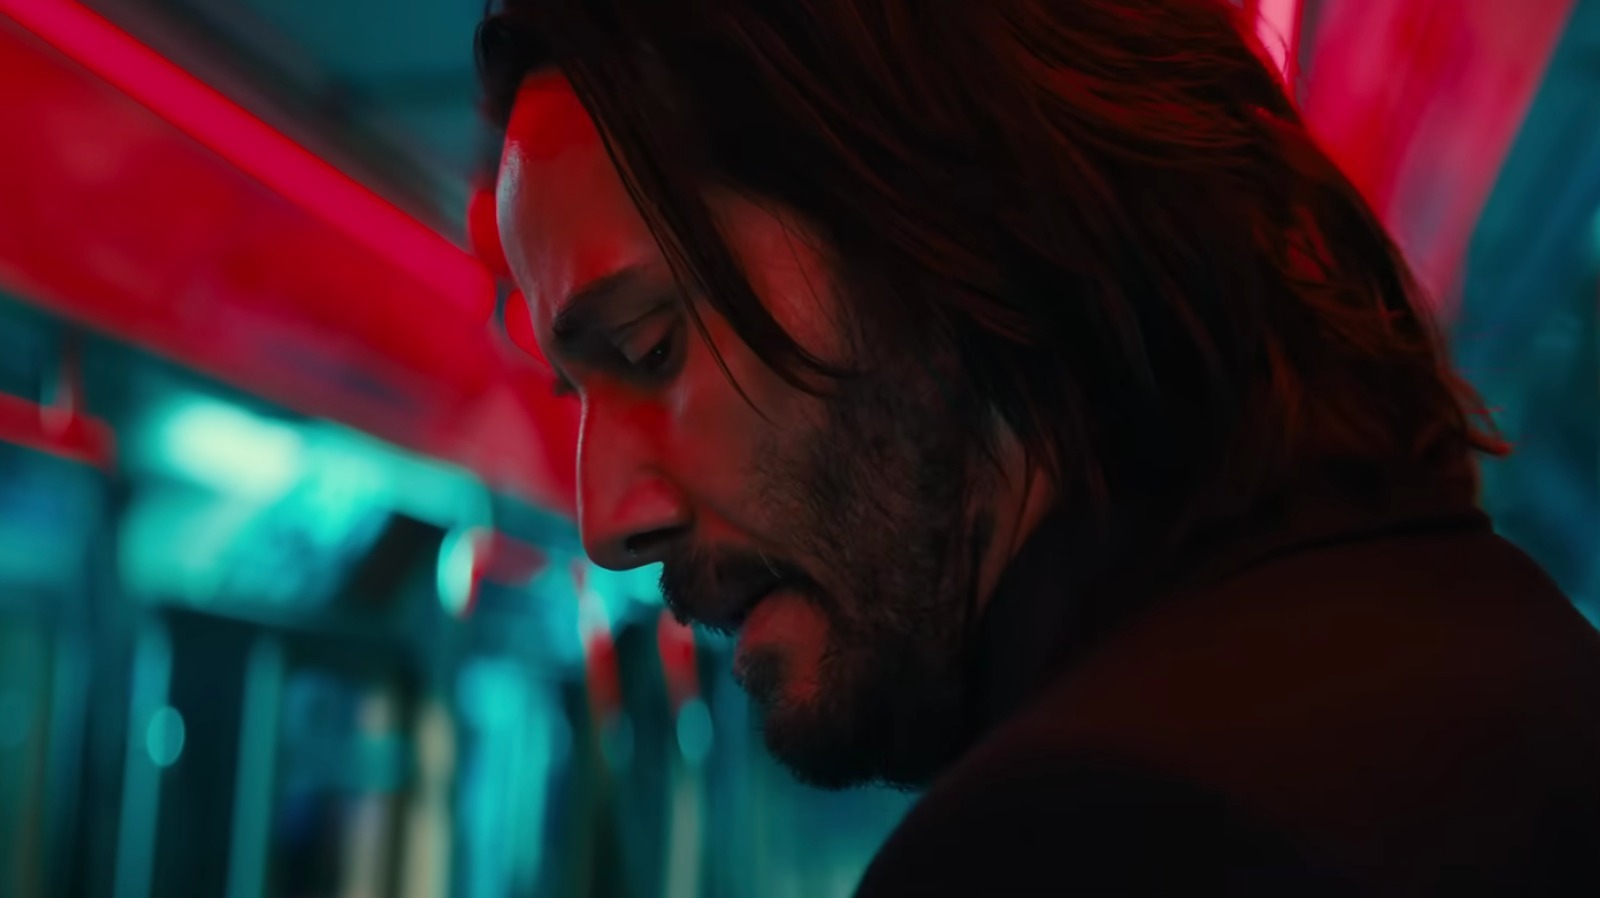 John Wick 4 Is Embracing The Series' Anime Influences